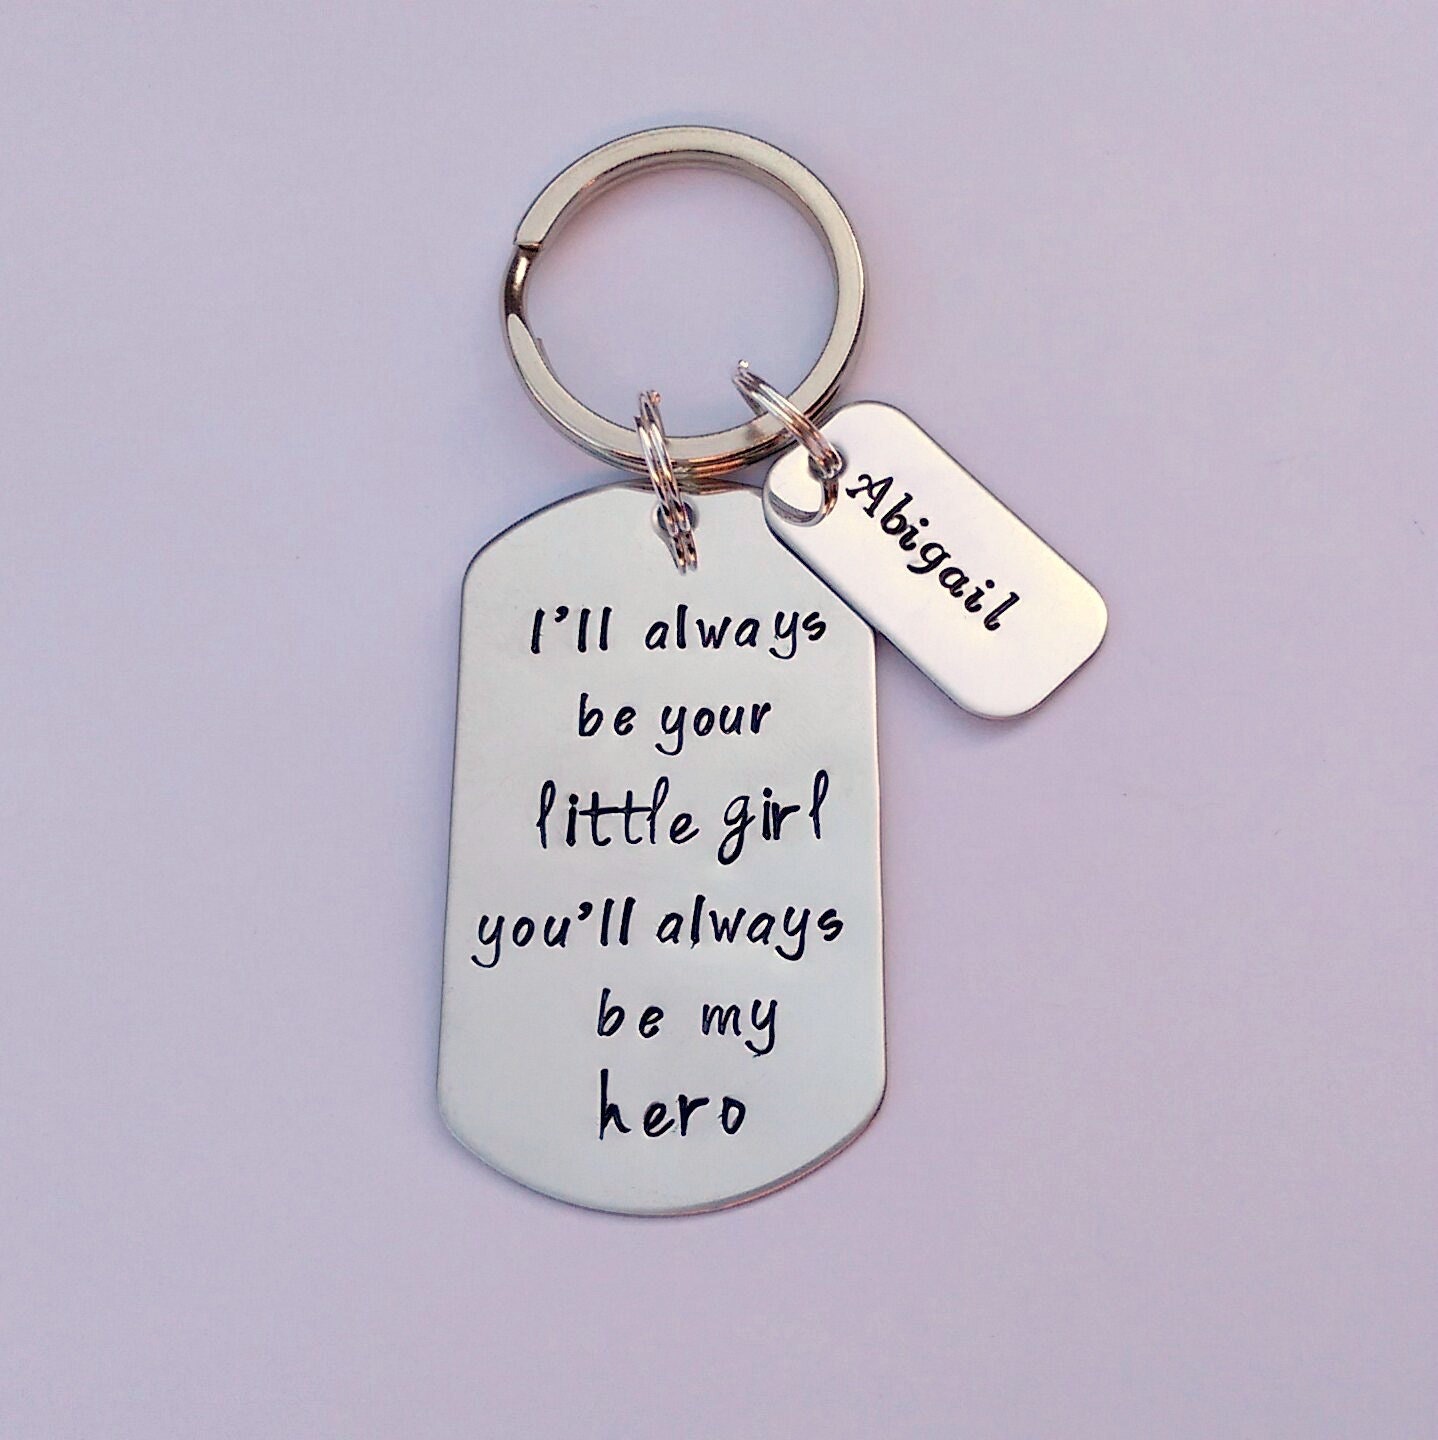 Personalised Dad keyring keychain - personalized daddy daughter keychain - I'll always be your little girl -  gift present for dad daddy